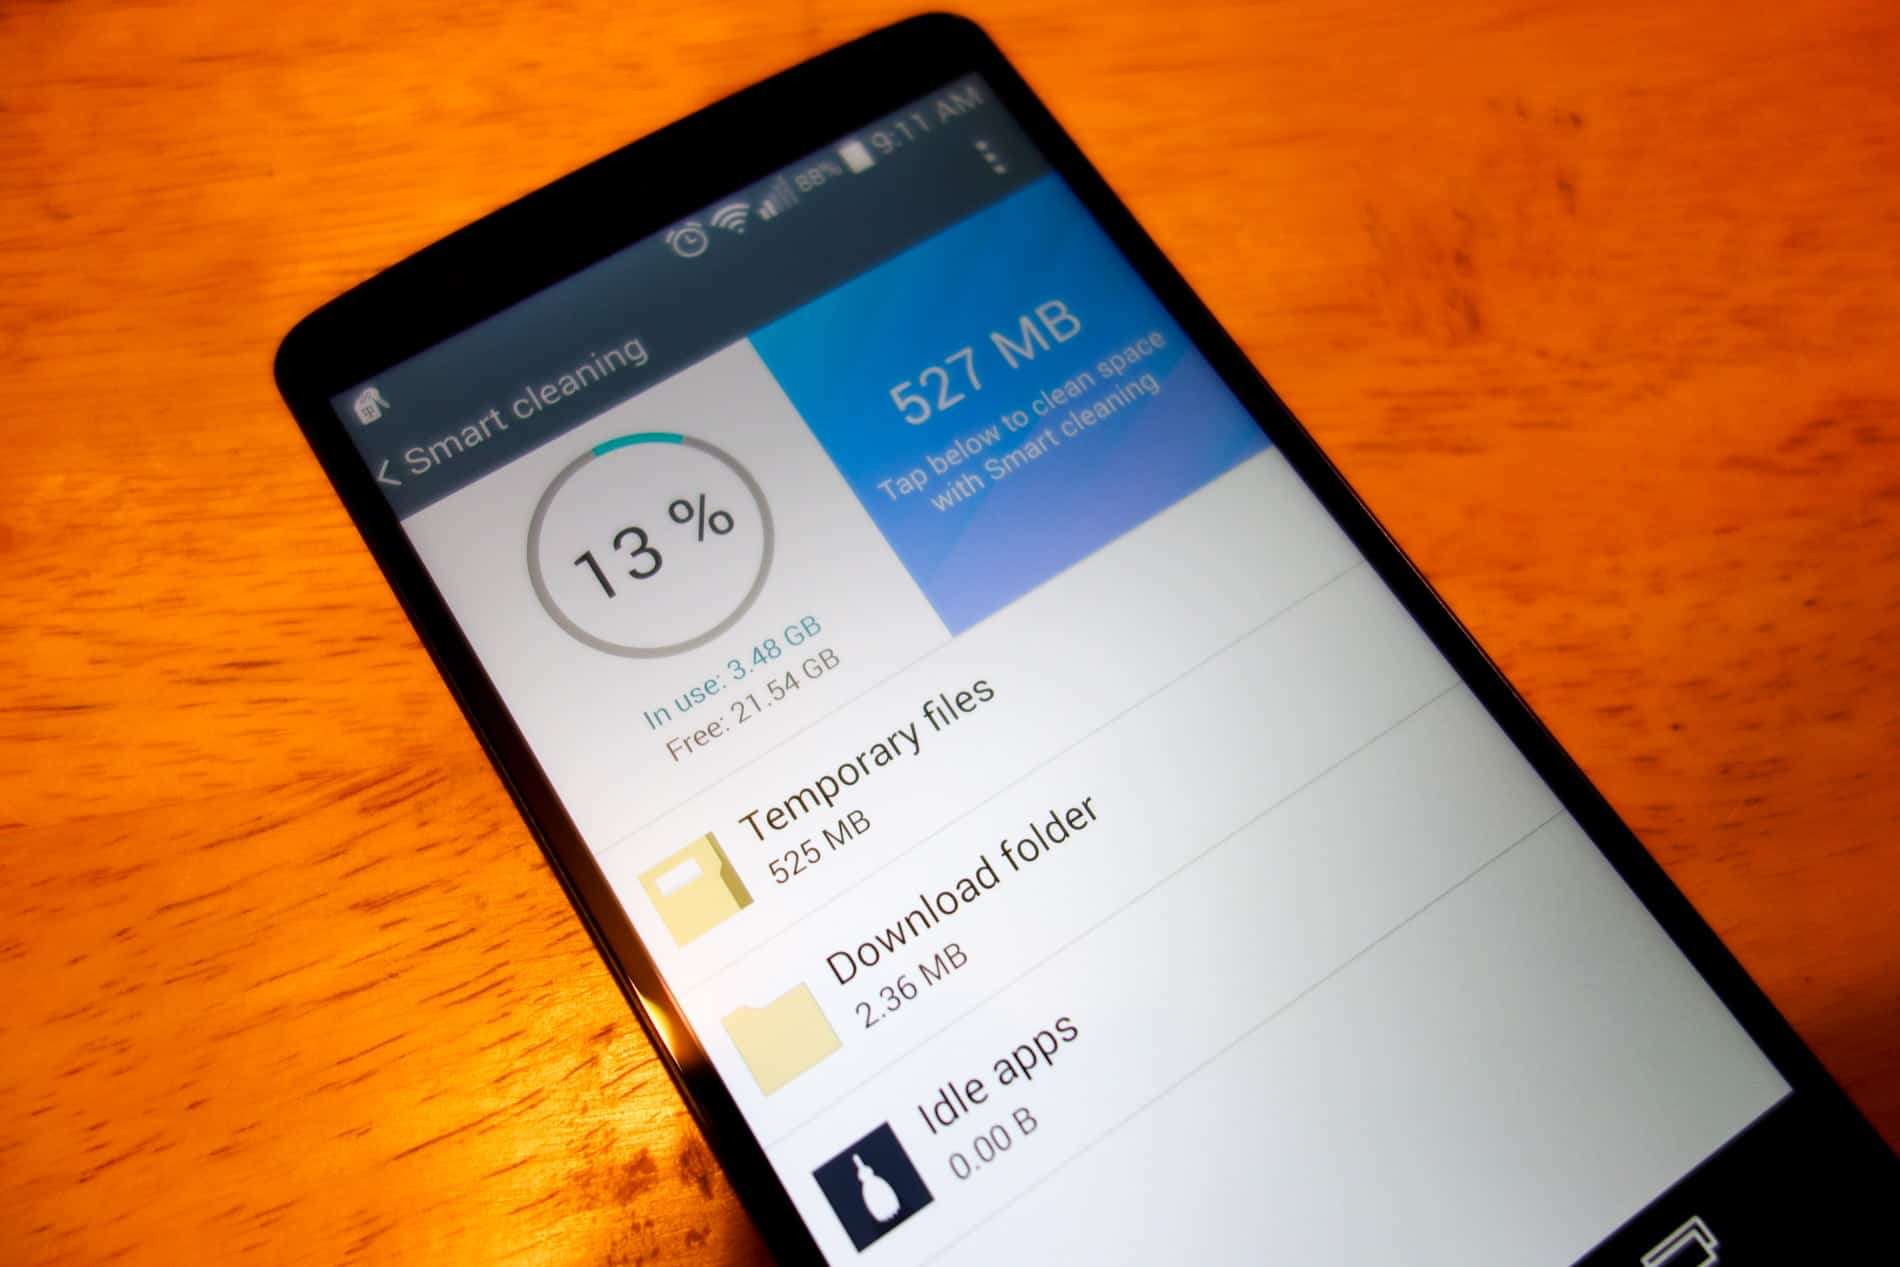 Find Out How to Make a Phone Faster Using an Android Cleaner